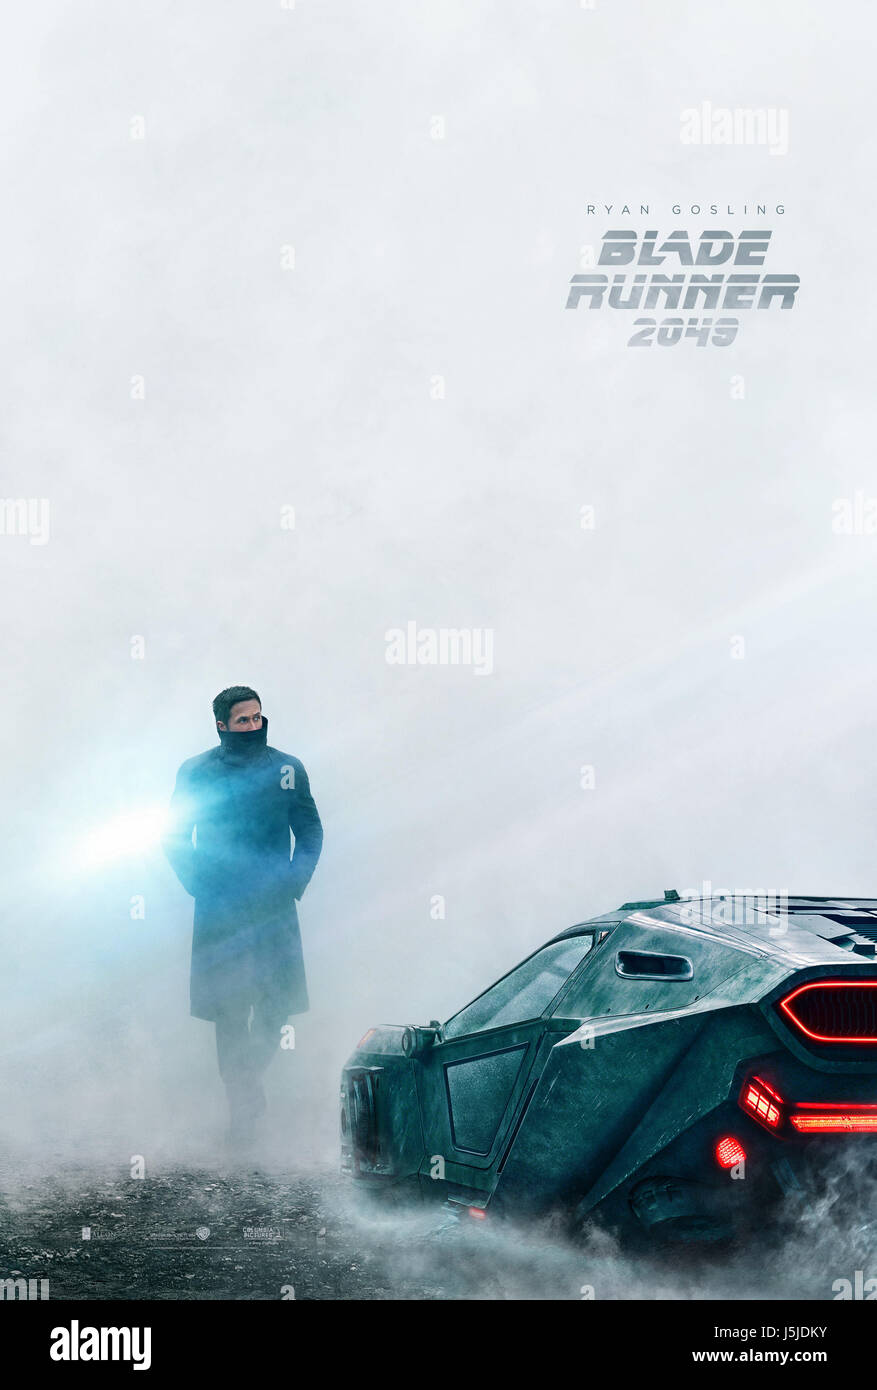 LEASE DATE: October 6, 2017 TITLE: Blade Runner 2049 STUDIO: Columbia Pictures DIRECTOR: Denis Villeneuve PLOT: Thirty years after the events of the first film, a new blade runner, LAPD Officer K (Ryan Gosling), unearths a long-buried secret that has the potential to plunge what's left of society into chaos. K's discovery leads him on a quest to find Rick Deckard (Harrison Ford), a former LAPD blade runner who has been missing for 30 years STARRING: Ryan Gosling Poster Art. (Credit: © Columbia Pictures/Entertainment Pictures/ZUMAPRESS.com) Stock Photo